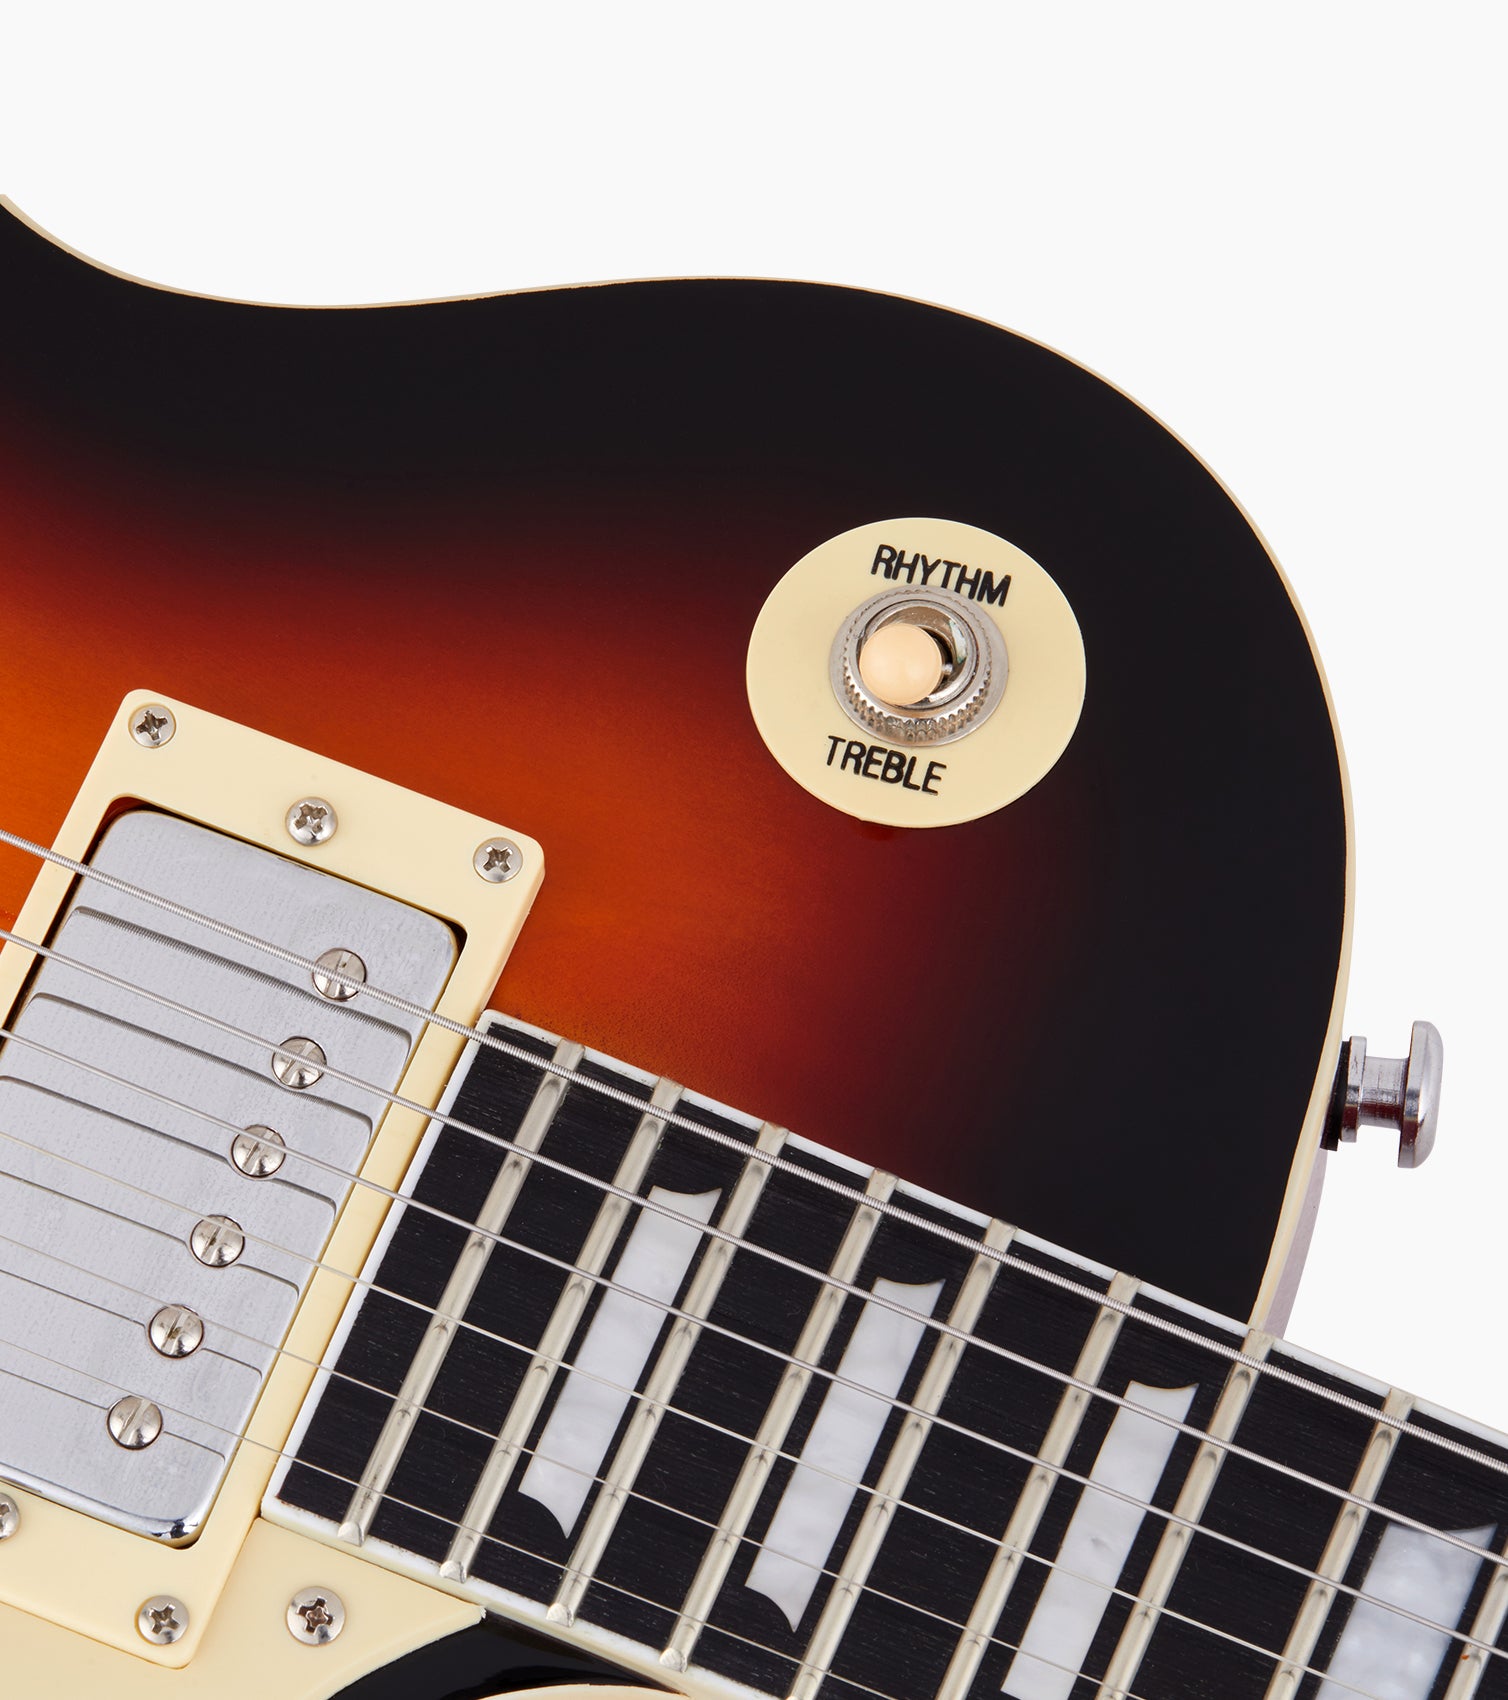 close-up of Sunburst les paul inspired electric guitar pickup selector switch